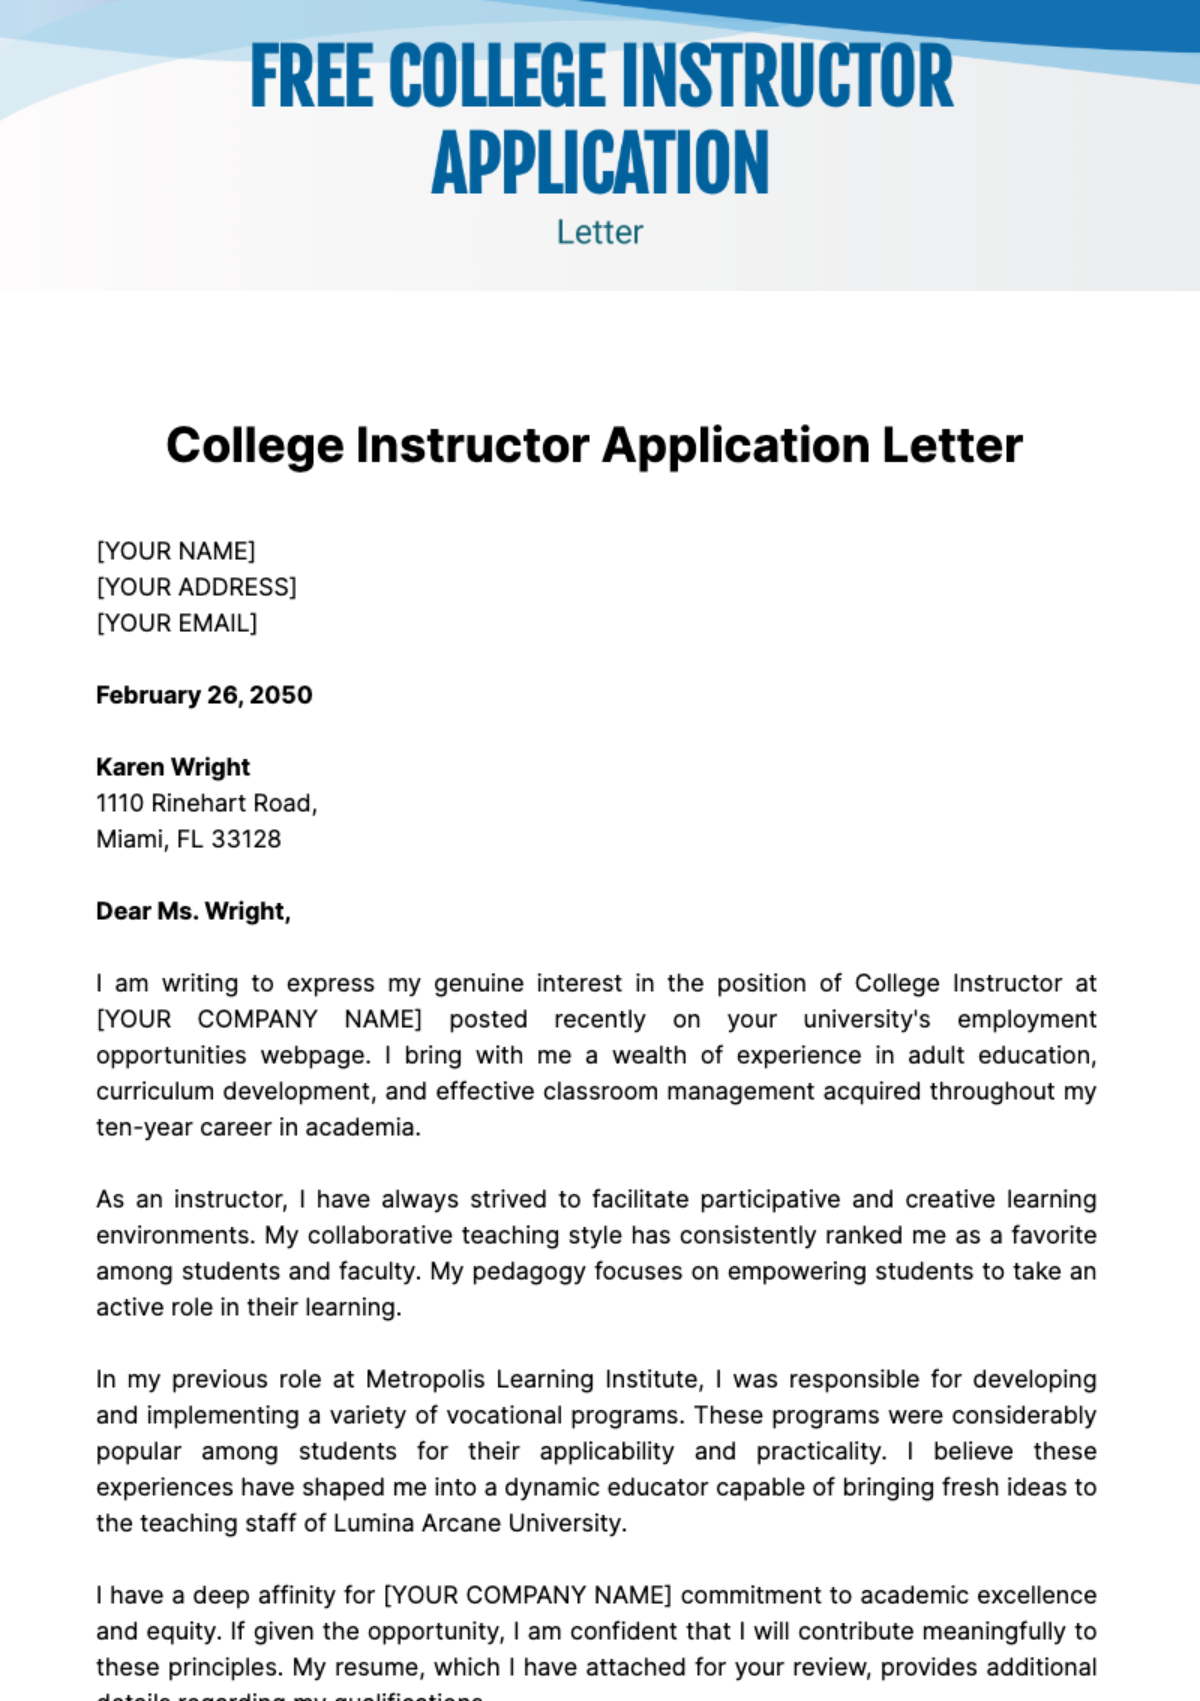 Free College Instructor Application Letter Template